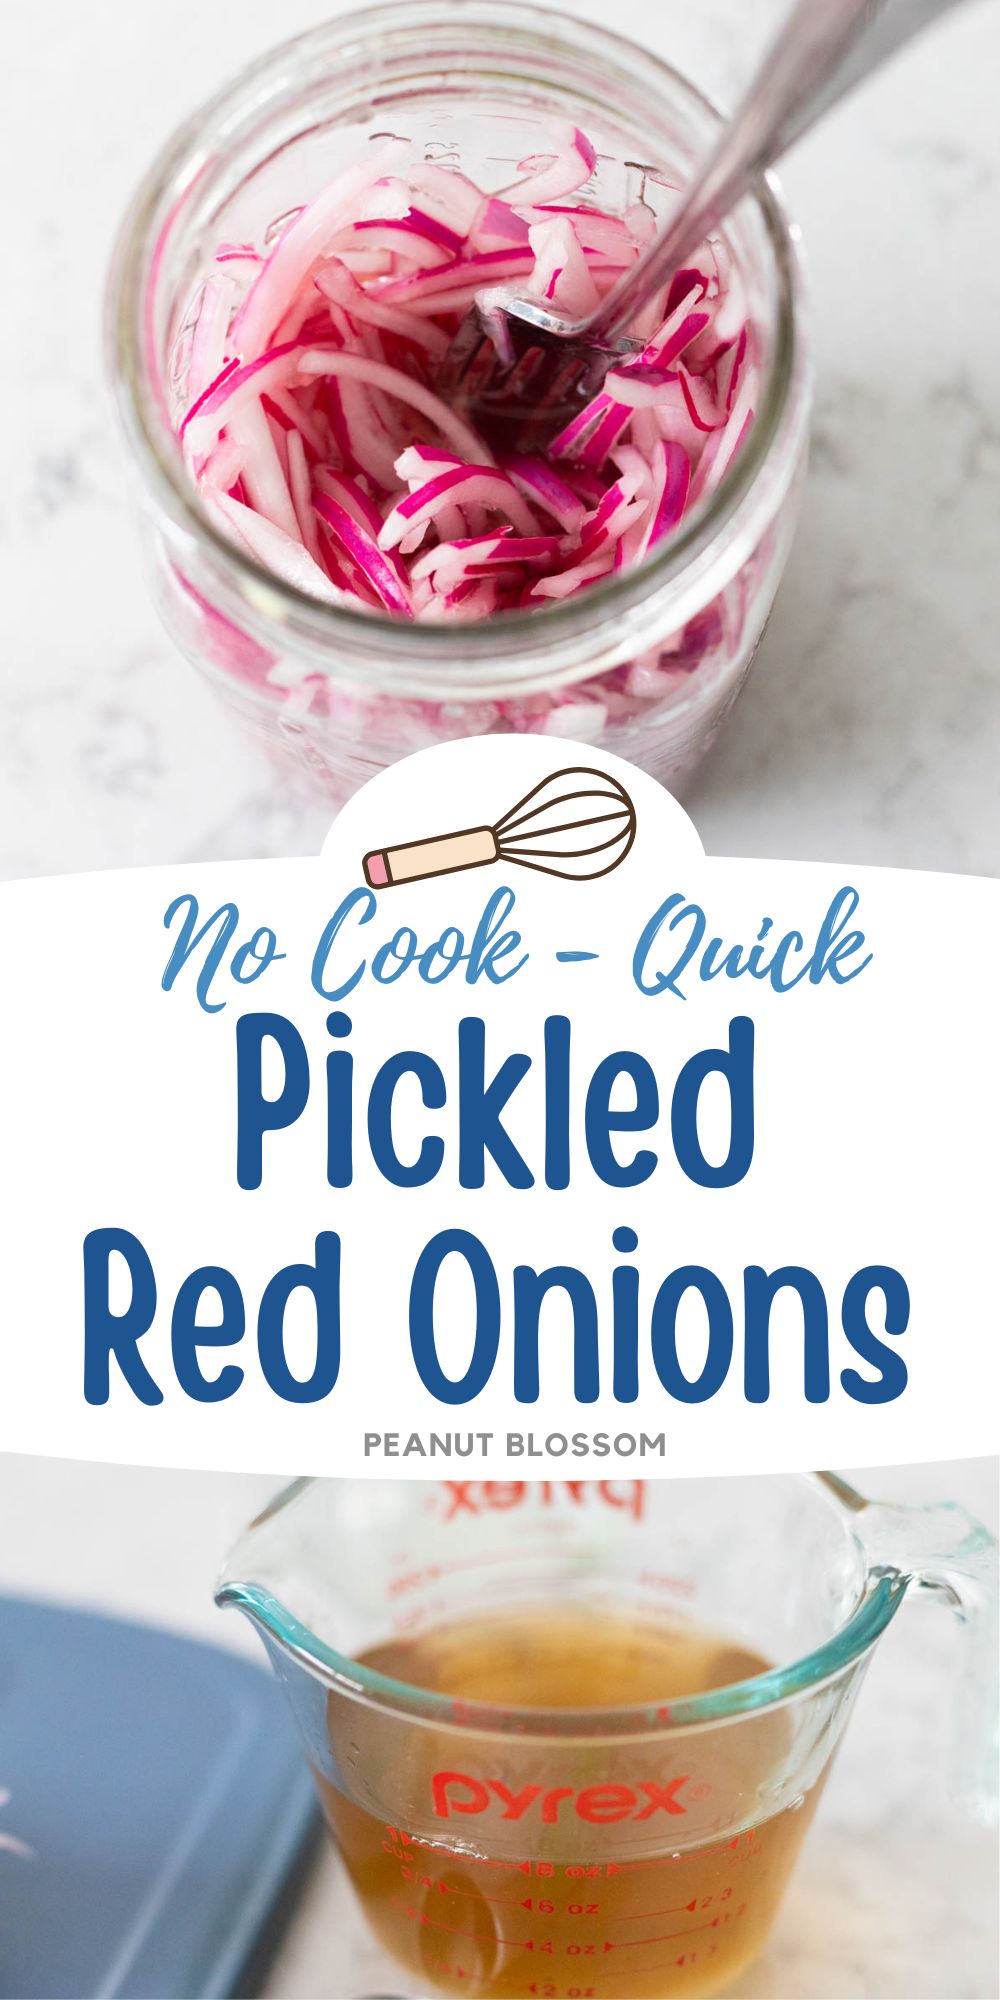 The finished red onions are in a mason jar being stirred with a fork.